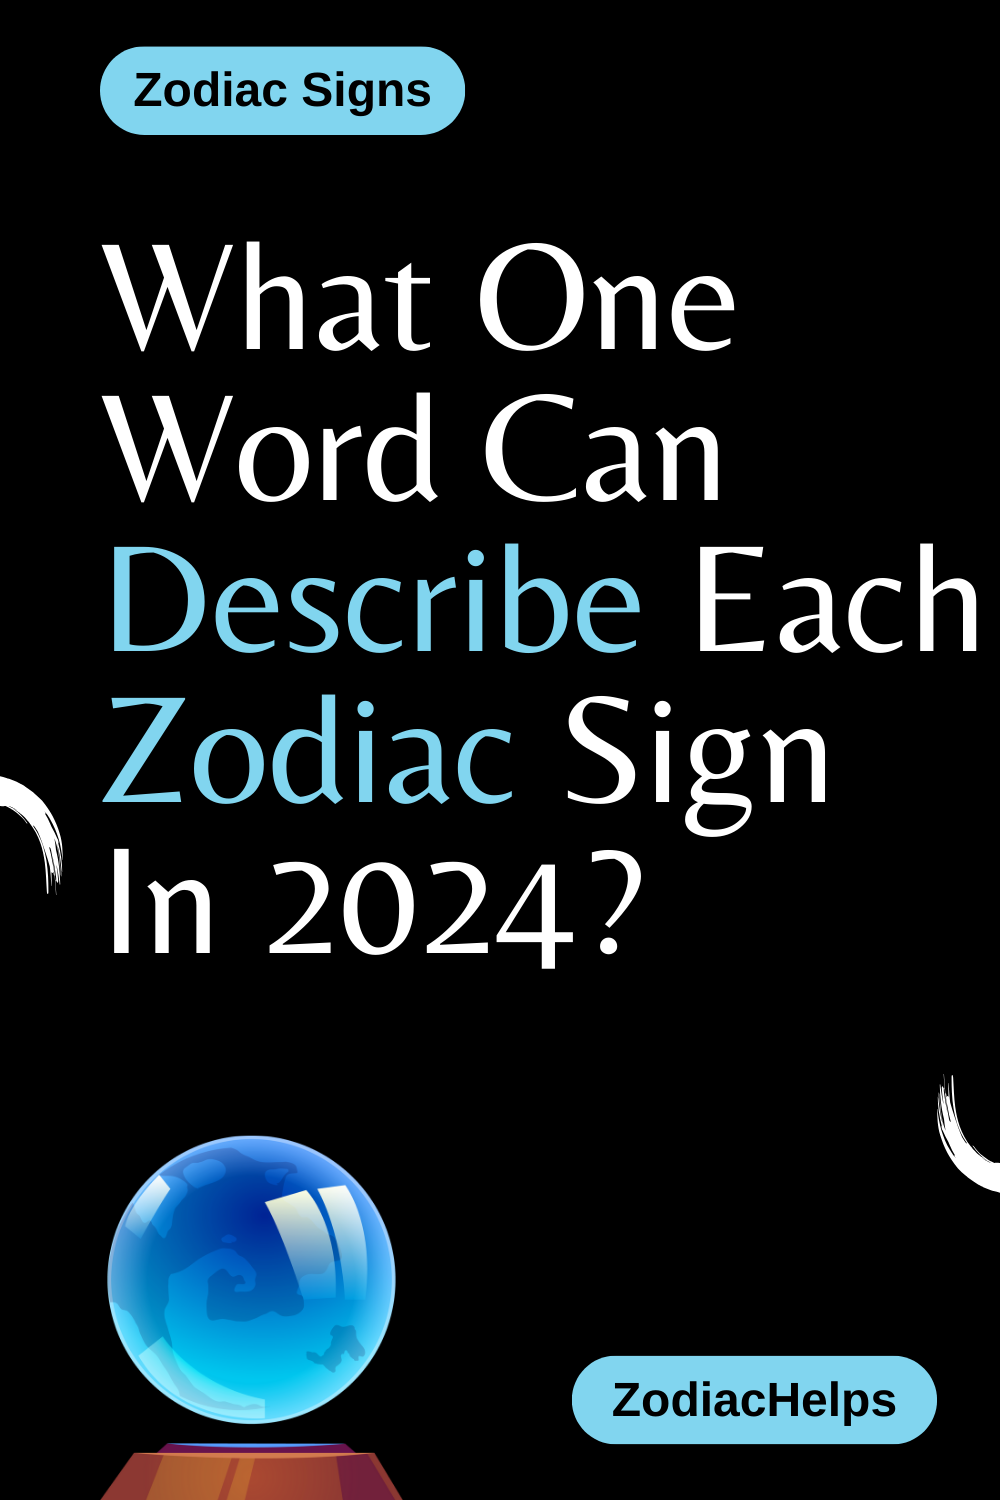 What One Word Can Describe Each Zodiac Sign In 2024